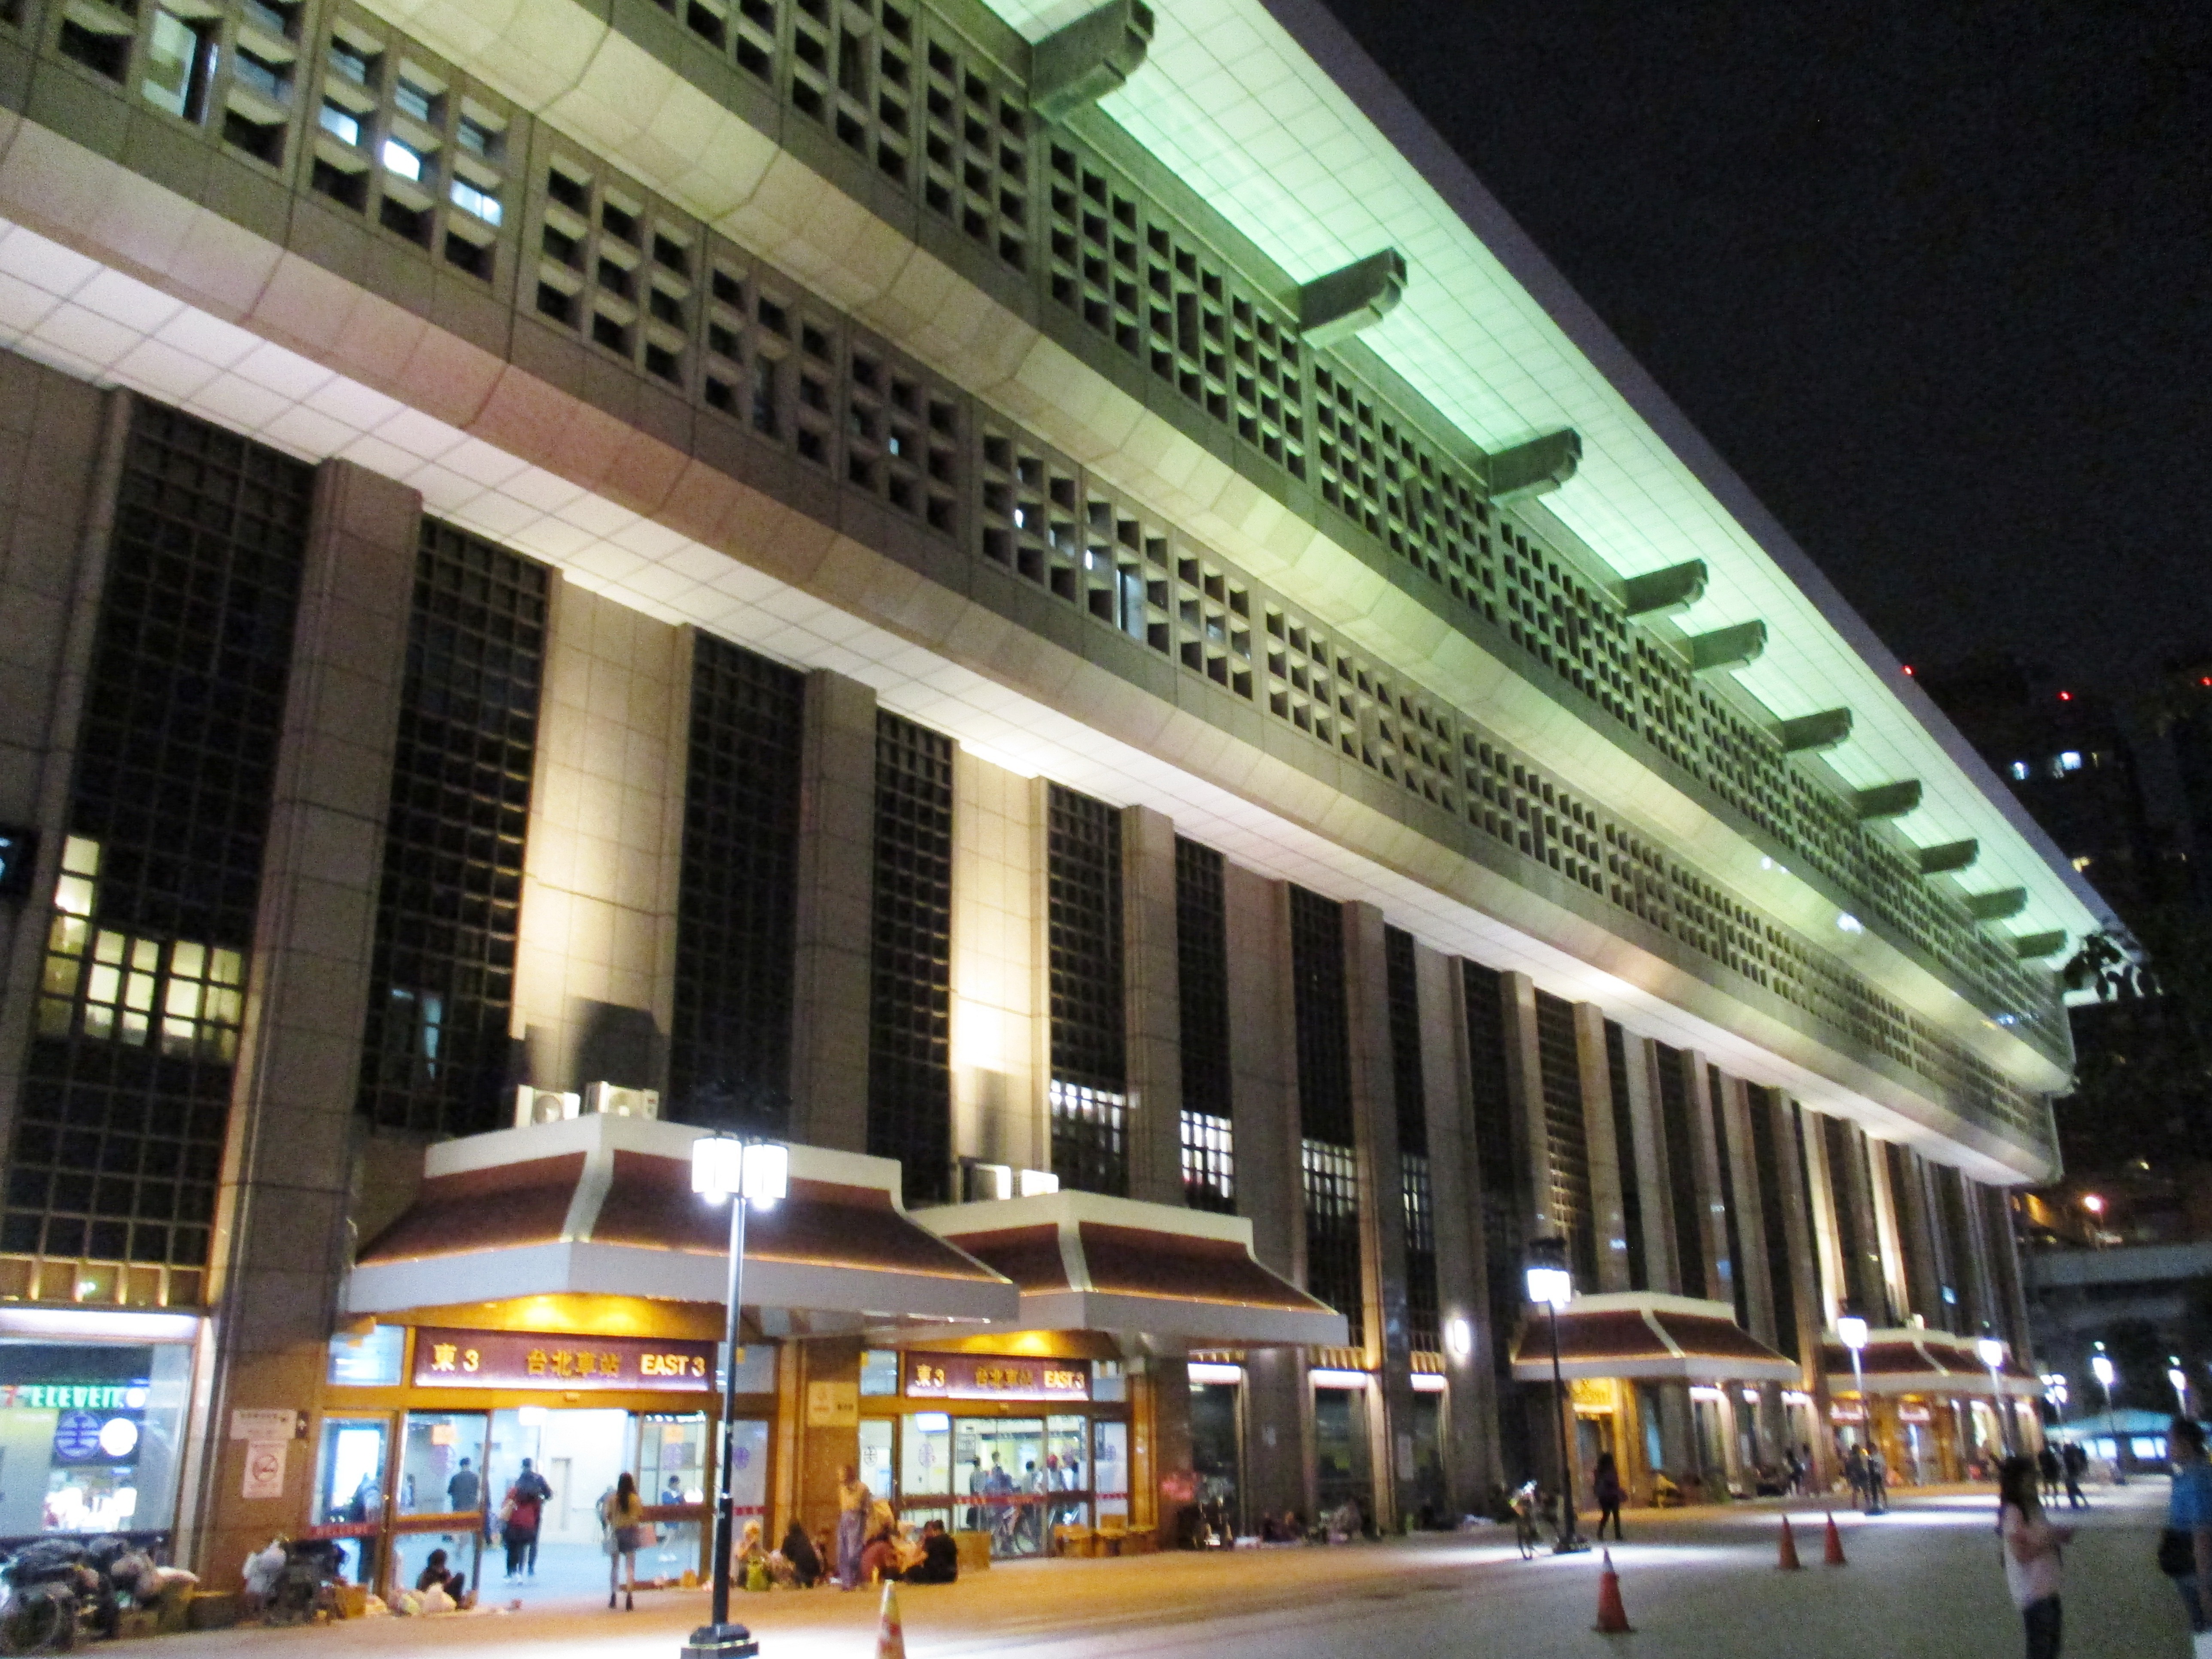 Taipei's main train station – behind it is the bus station and taxi ranks, on the other side is the above ground trains to the airport and underneath it ten city blocks of shopping. Photo: Stivi Cooke